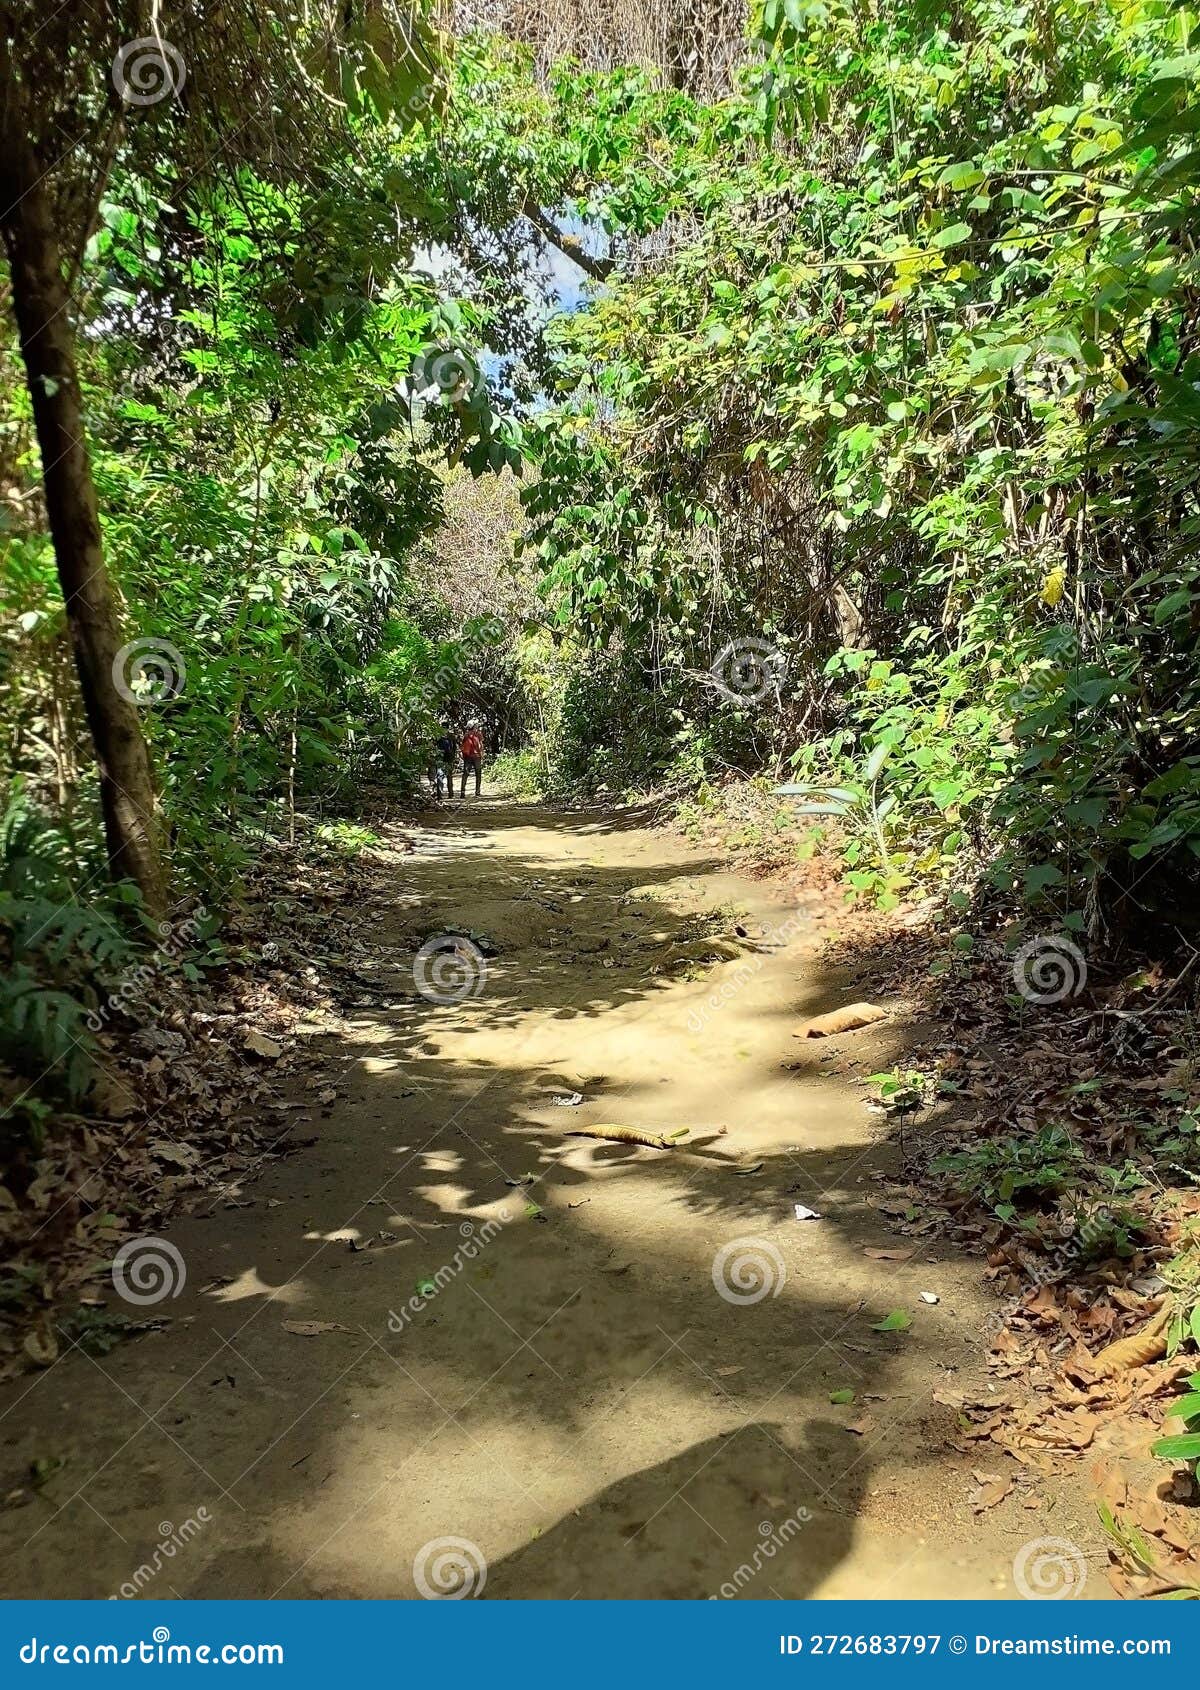 trail in tropical forest, nicaragua.